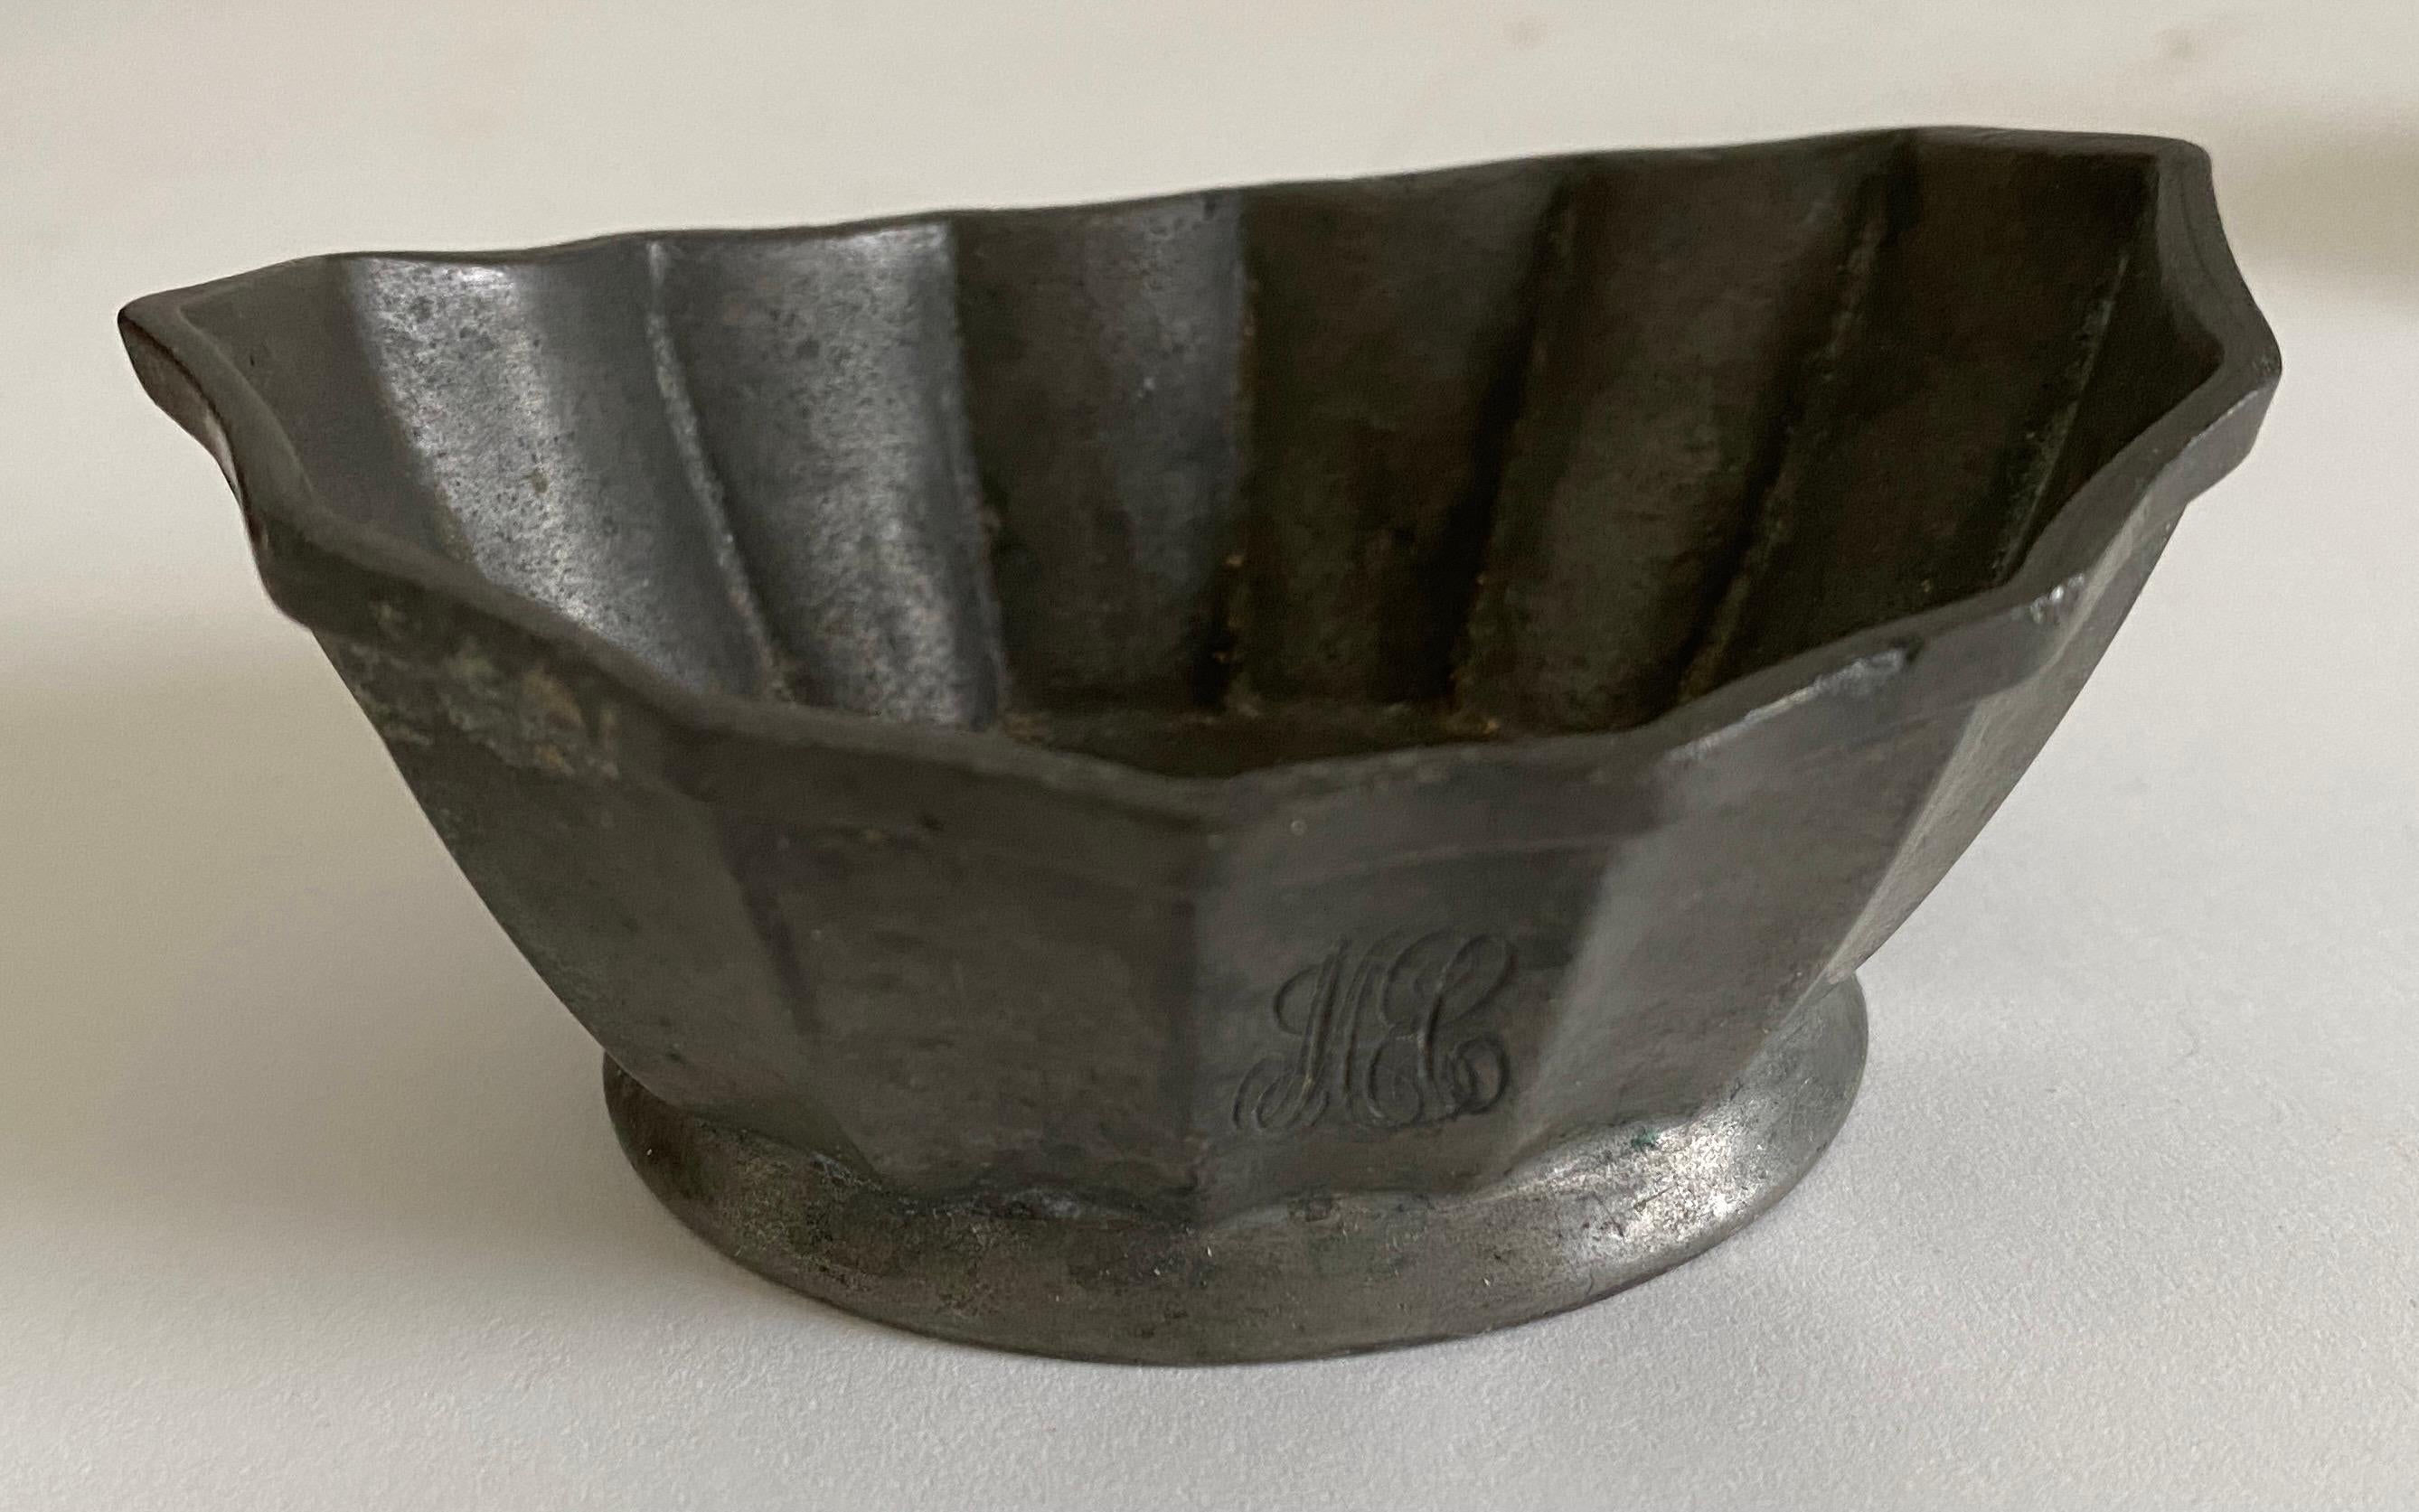 Pair of wonderfully charming antique oval shaped pewter dishes with scalloped rim. A nice pair for display, to hold small trinkets, or to adorn a table or shelf.
IMPORTANT NOTE:  These are collectable items to be used for display or decoration only.